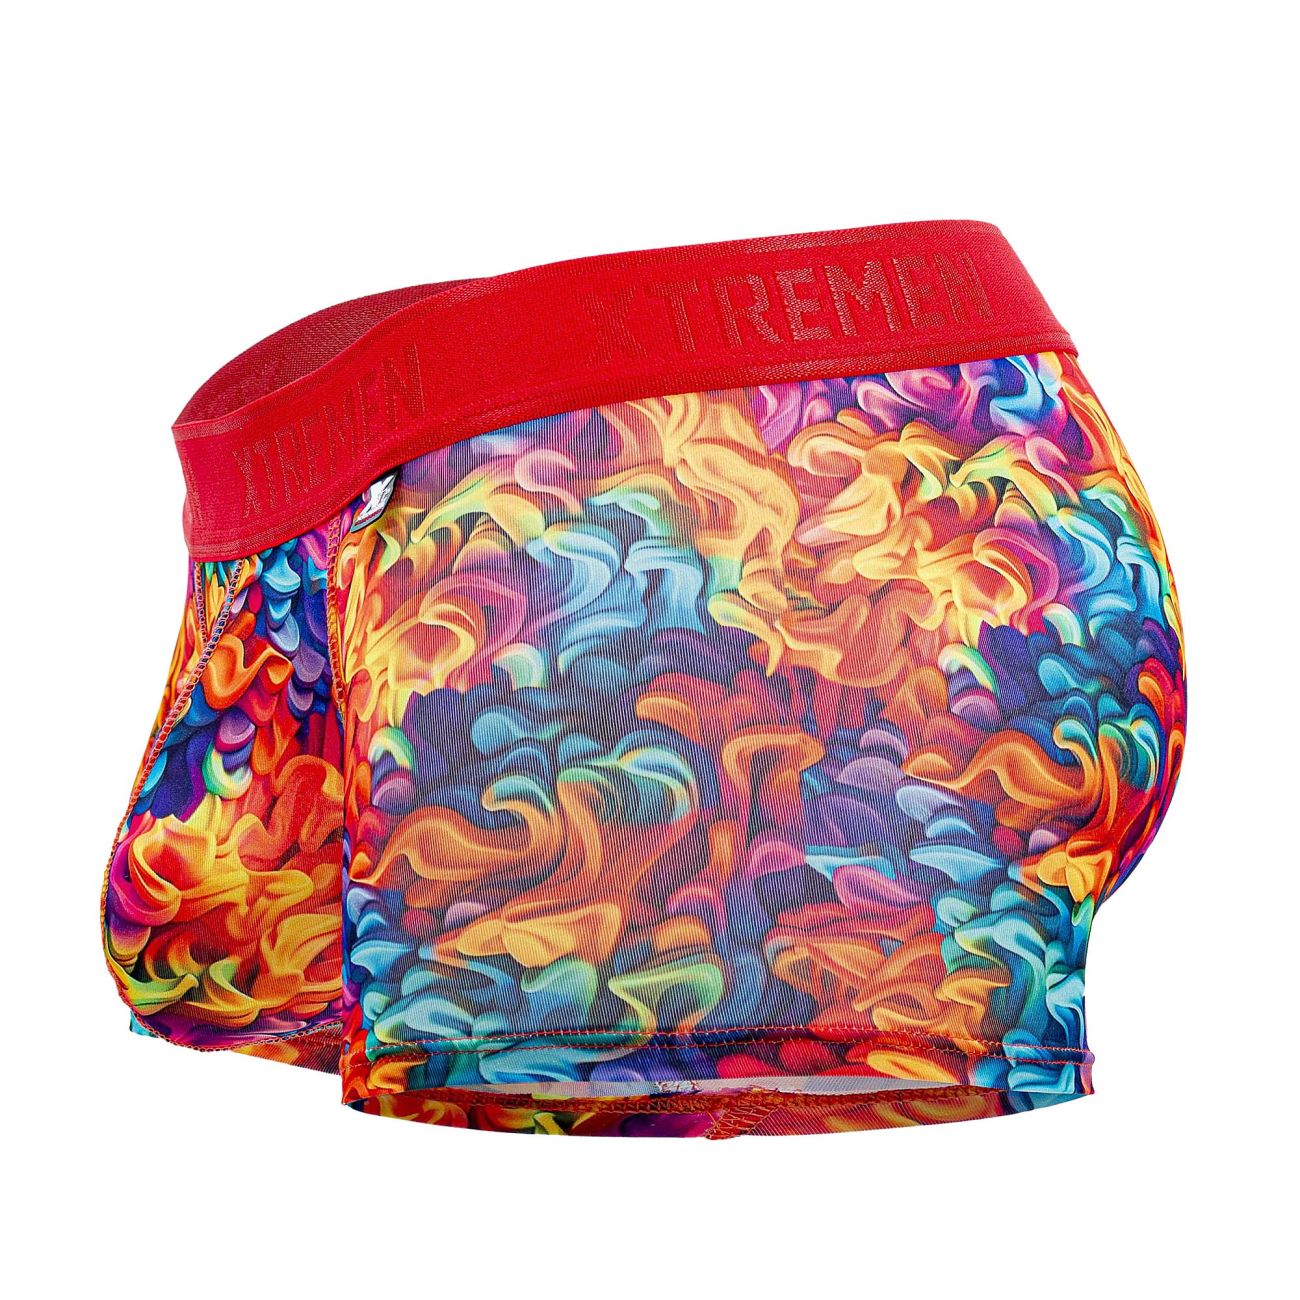 Xtremen 91173 Printed Trunks Fire